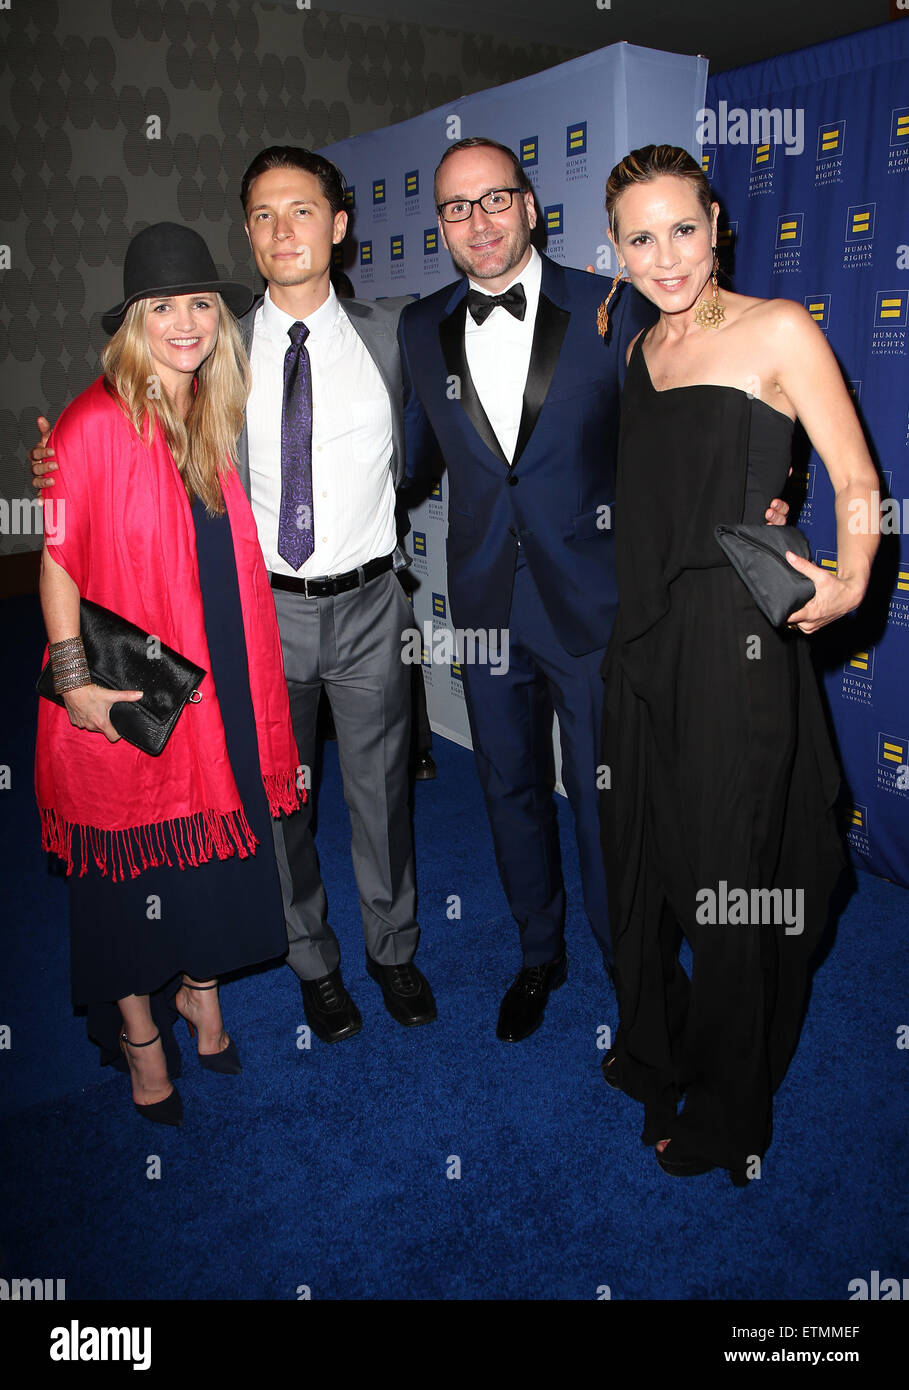 HRC Los Angeles Gala Dinner 2015 at the JW Marriott Hotel at LA Live - Arrivals  Featuring: Clare Munn, Elijah Allan-Blitz, Chad Griffin, Maria Bello Where: Los Angeles, California, United States When: 14 Mar 2015 Credit: FayesVision/WENN.com Stock Photo